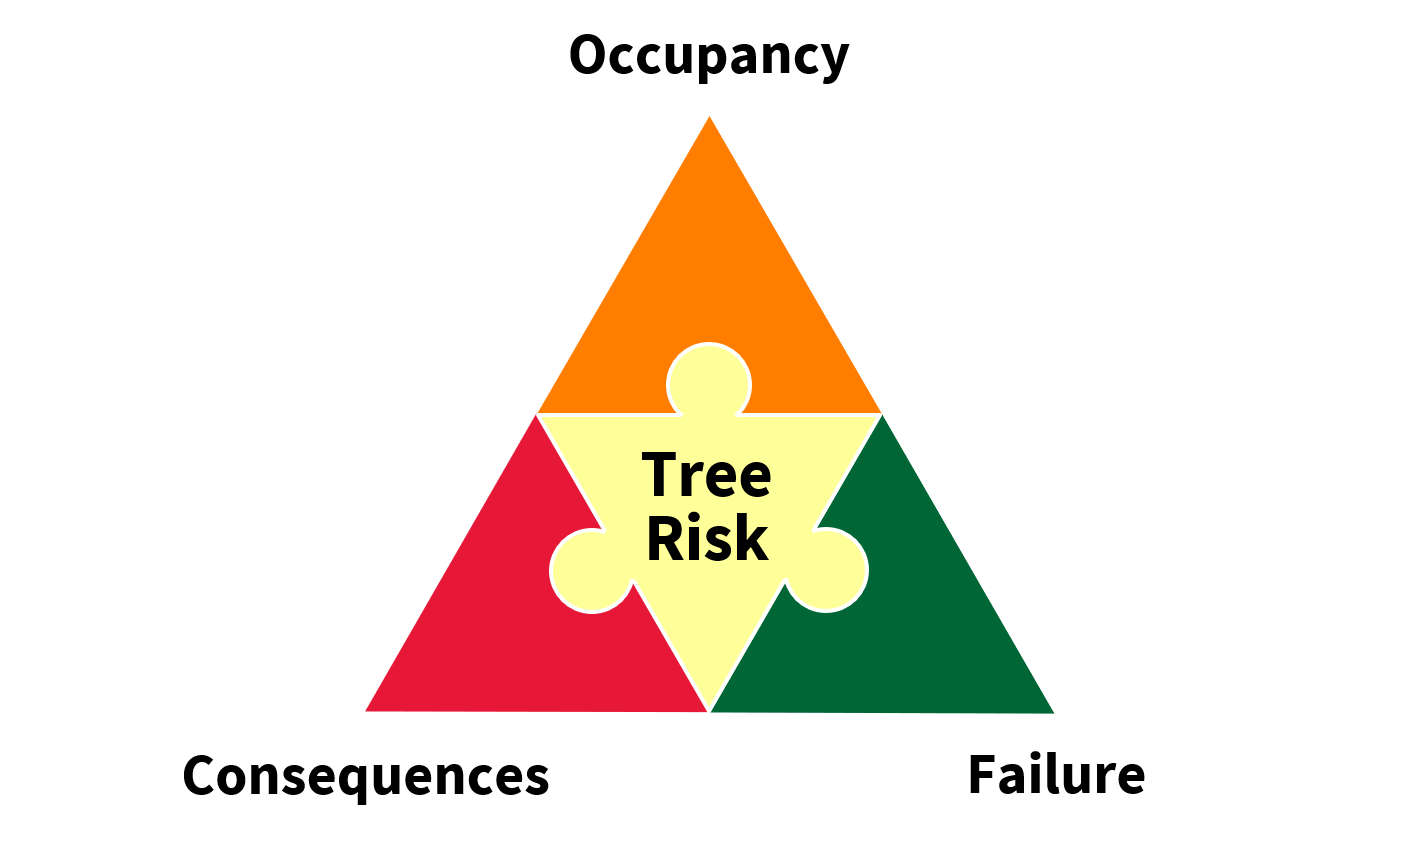 What is tree risk?